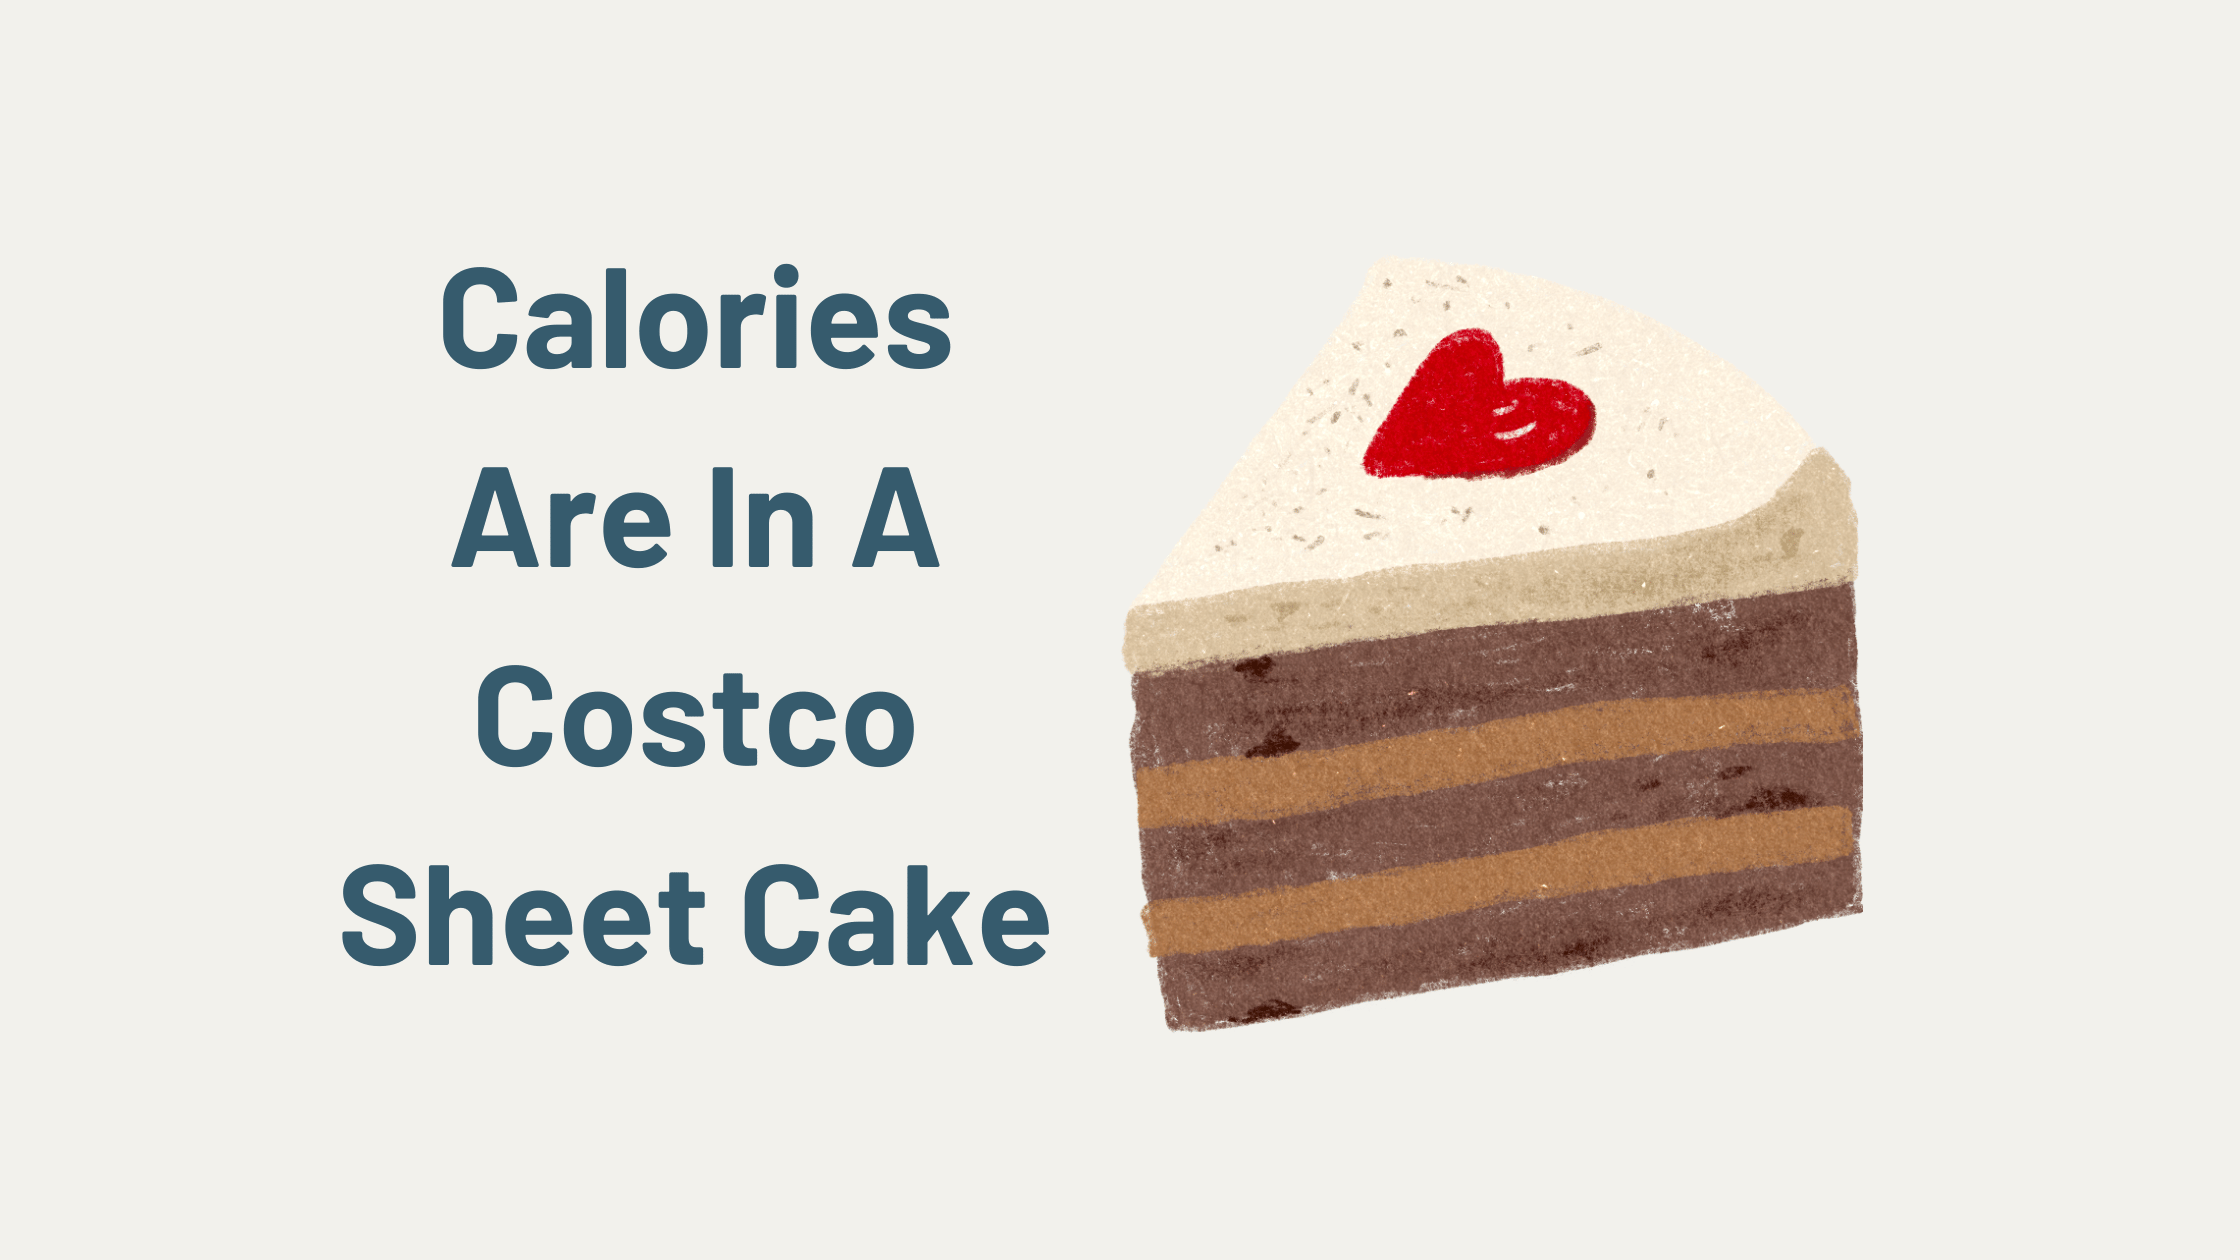 Calories Are In A Costco Sheet Cake